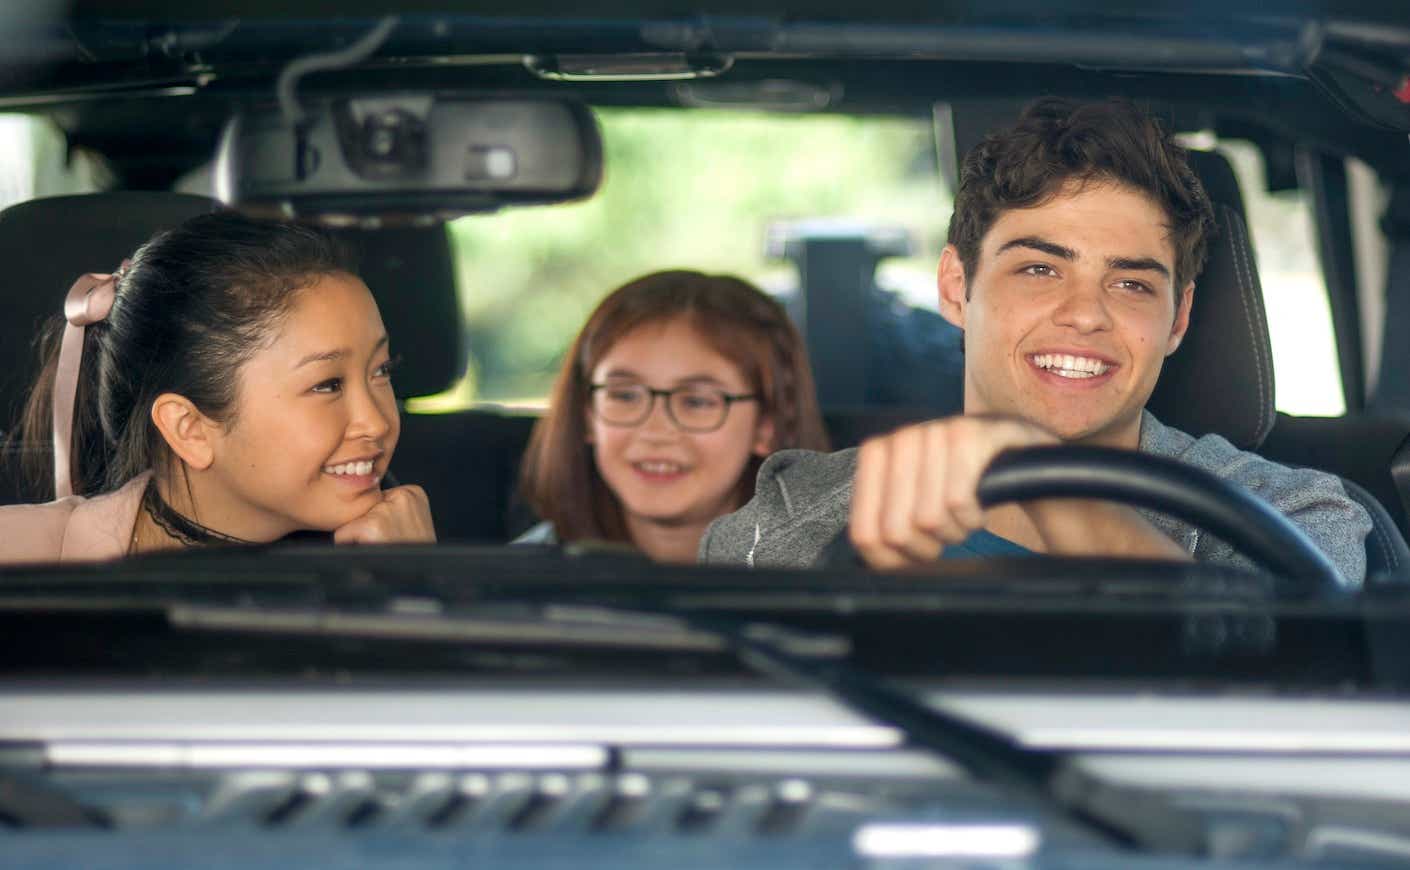 the cast of to all the boys i've loved before